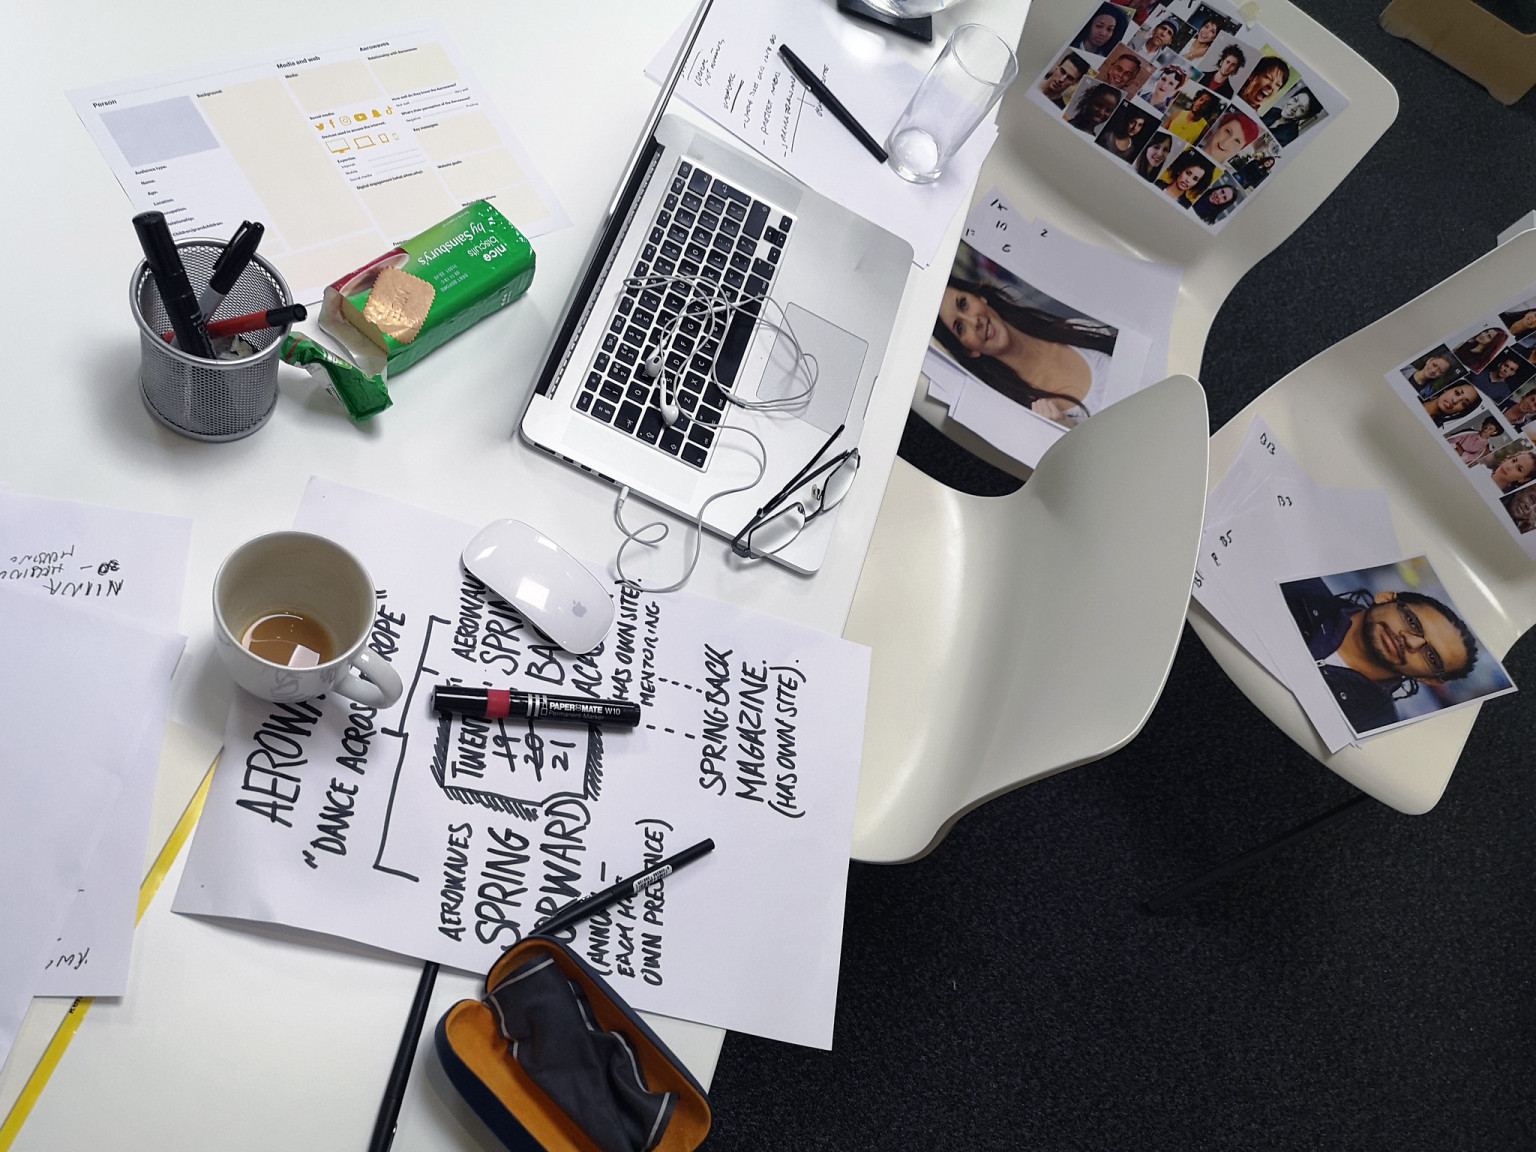 Studio desk after an active session, fuelled by tea and biscuits